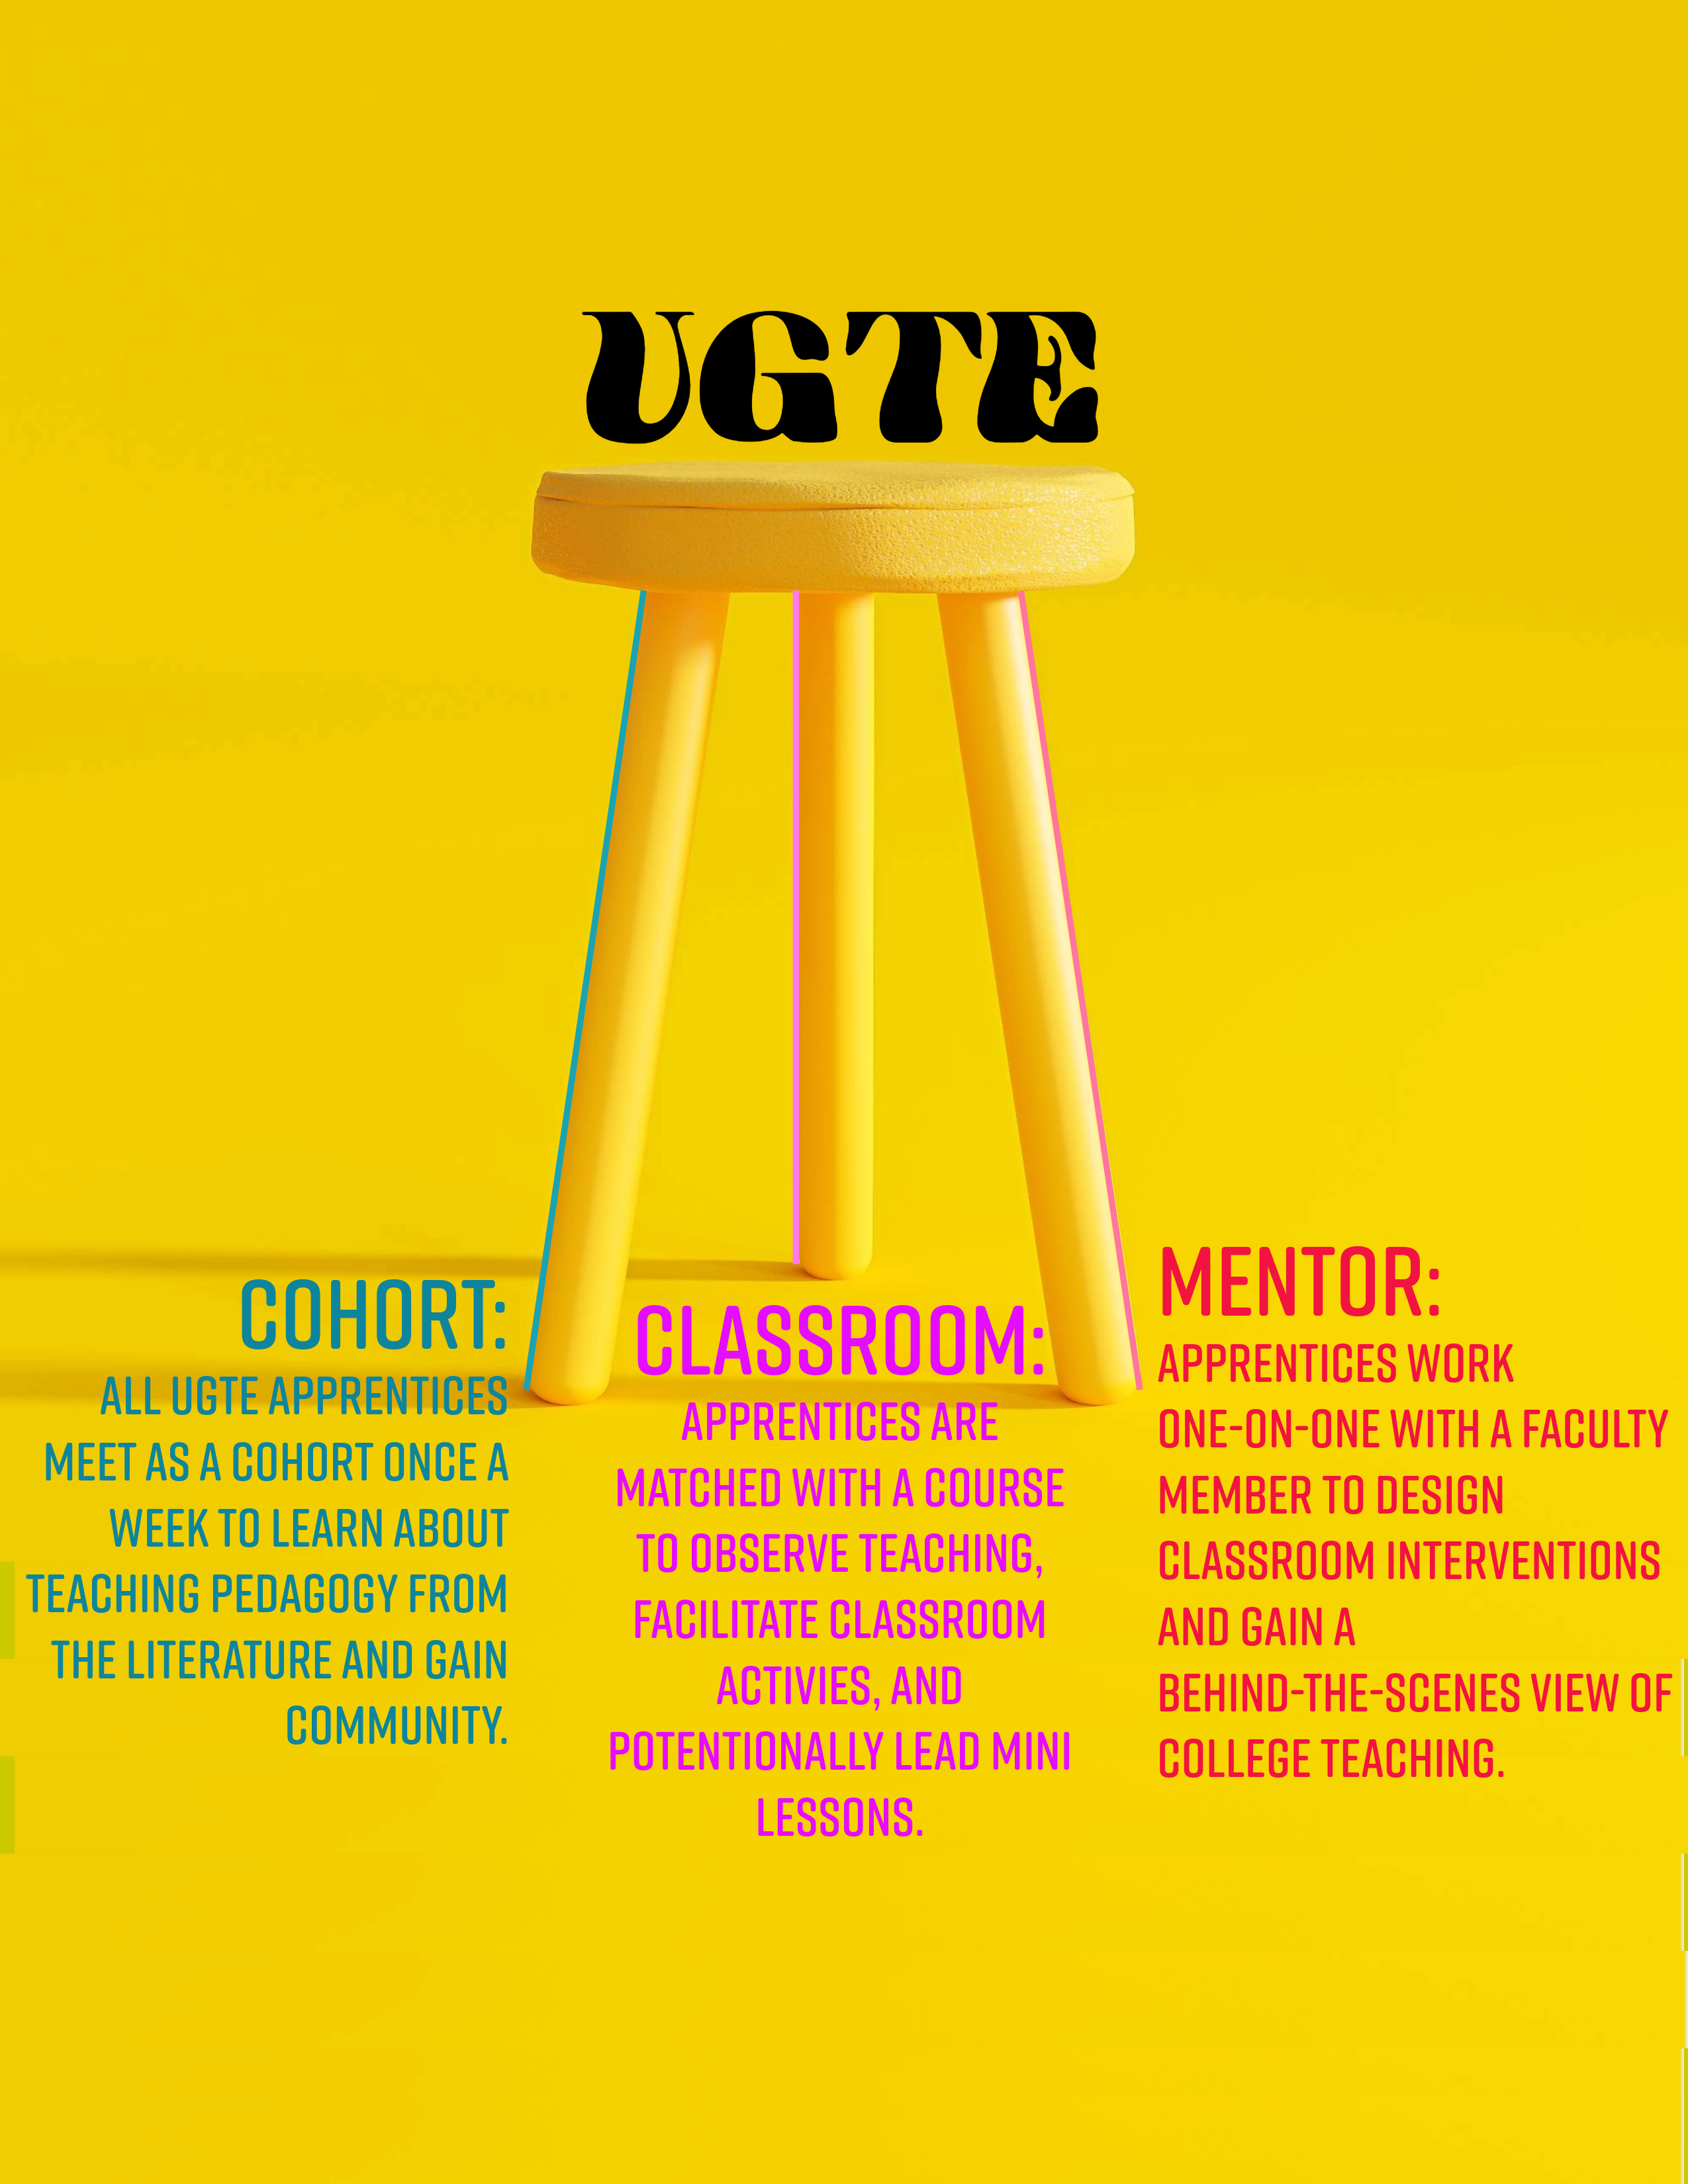 Three tier model of UGTE depicted as a stool